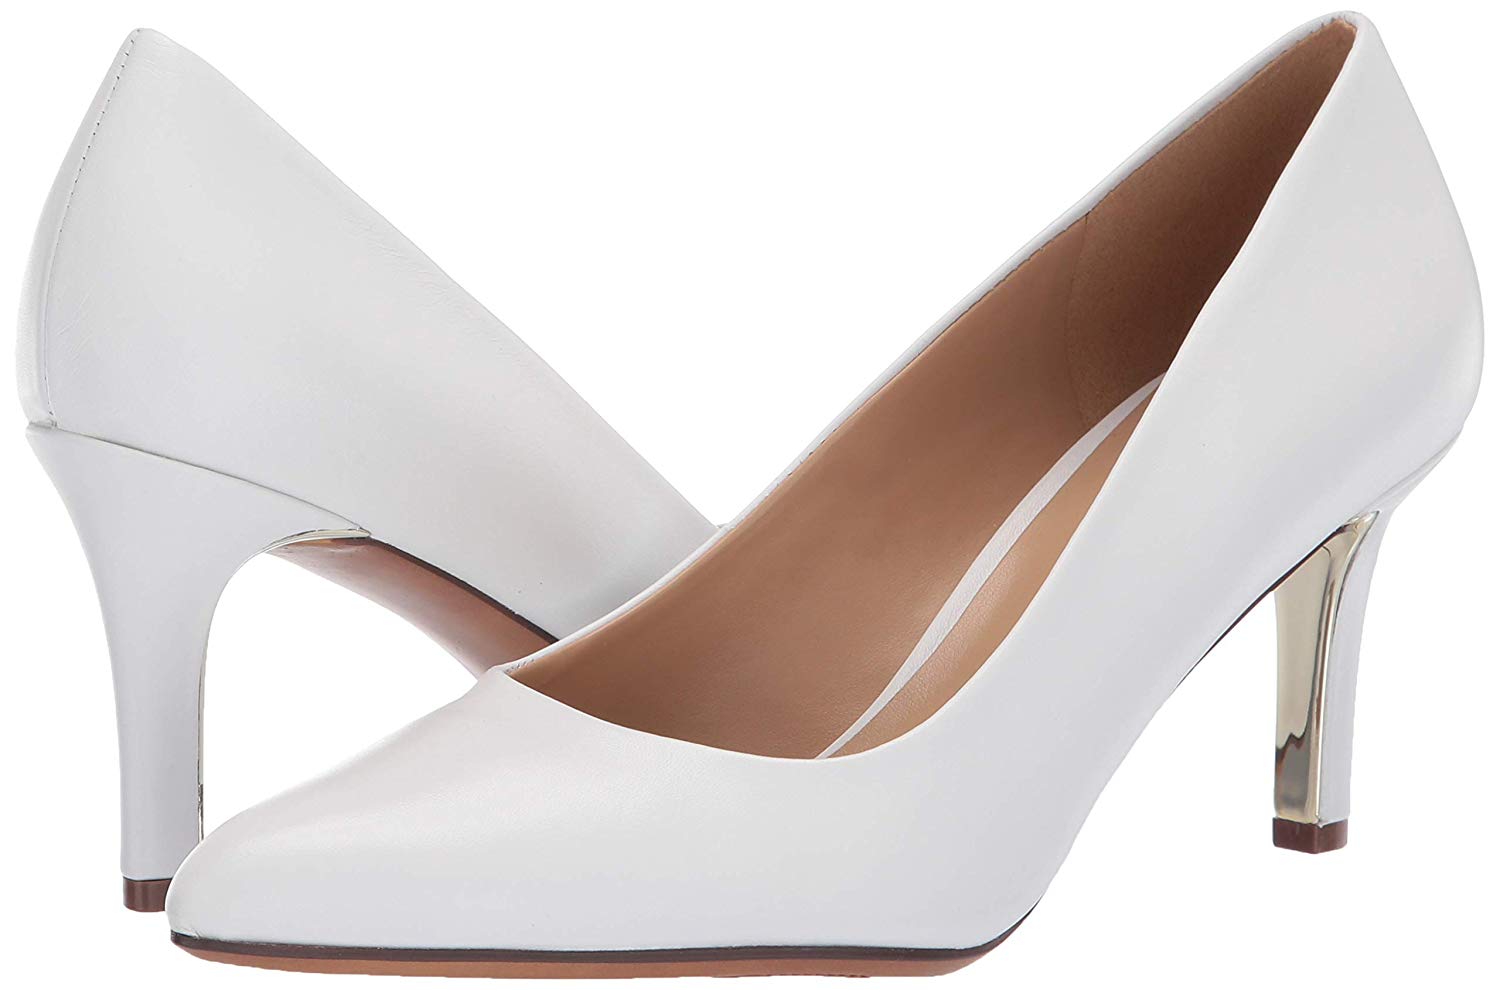 Naturalizer Womens Natalie Pointed Toe Classic Pumps, White, Size 9.0 ...